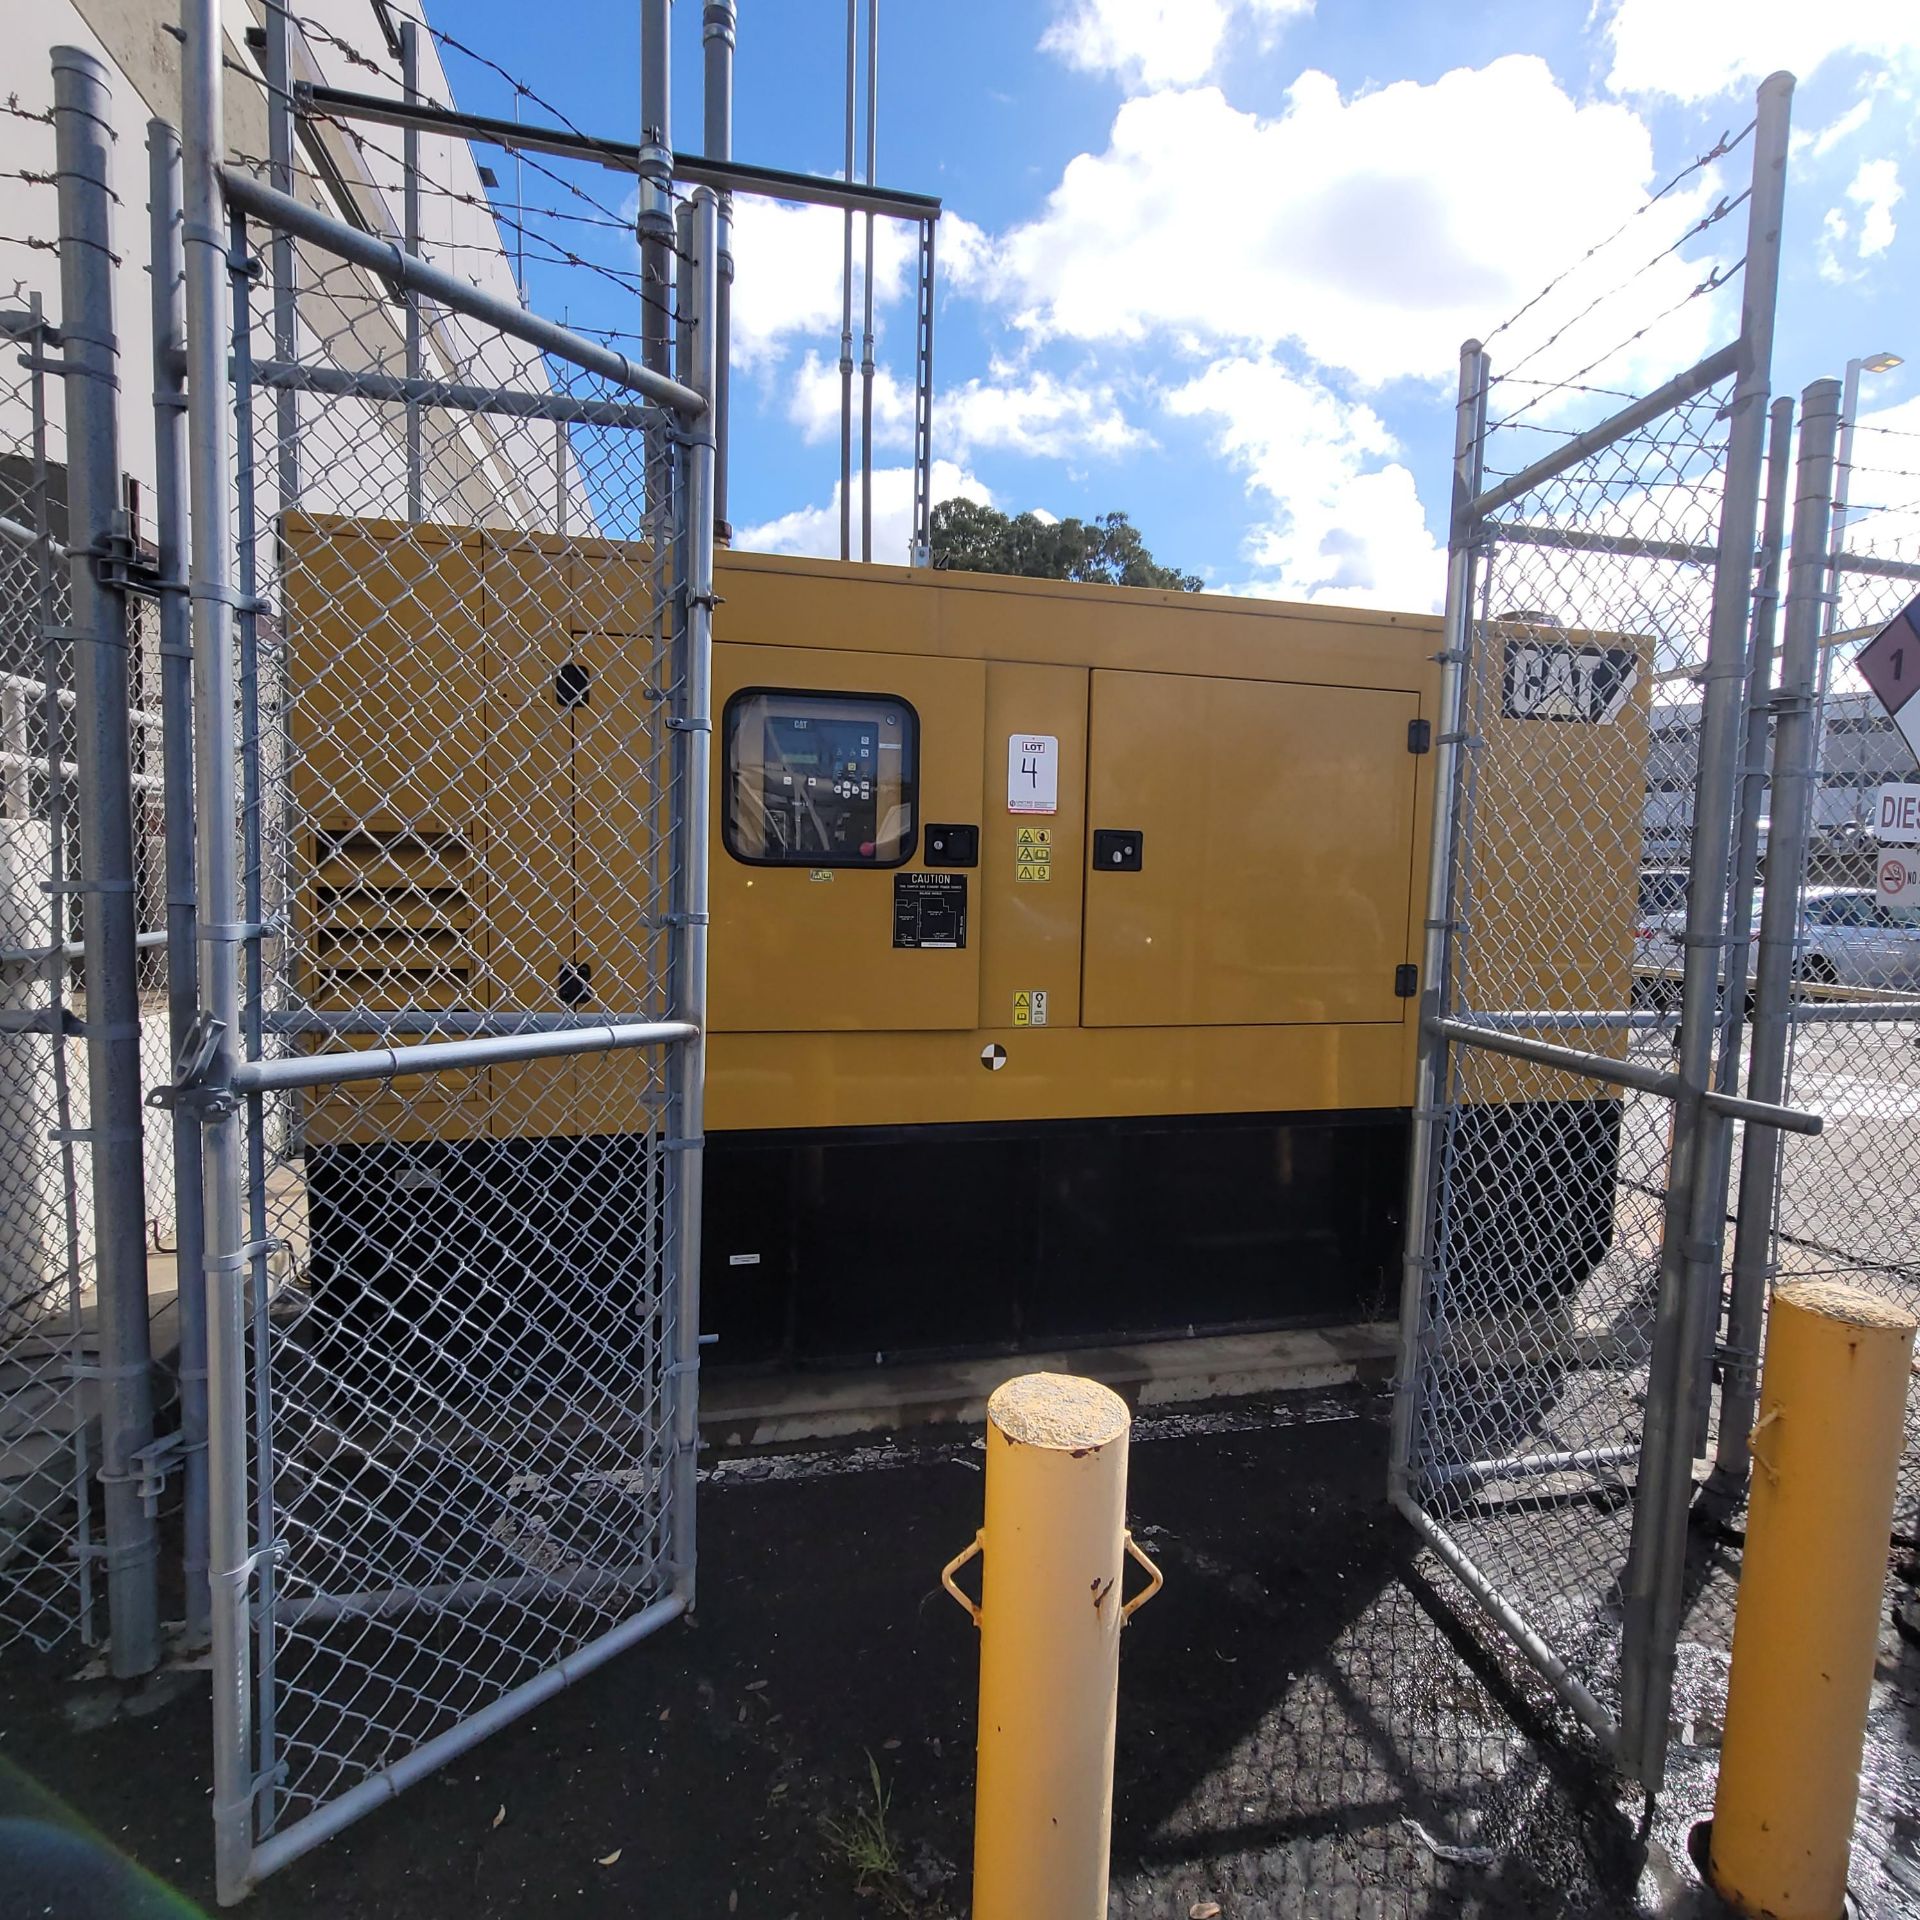 2009 CATERPILLAR STAND-BY GENERATOR, MODEL C6.6, (DELAYED PICKUP UNTIL MONDAY, APRIL 8) - Image 4 of 51